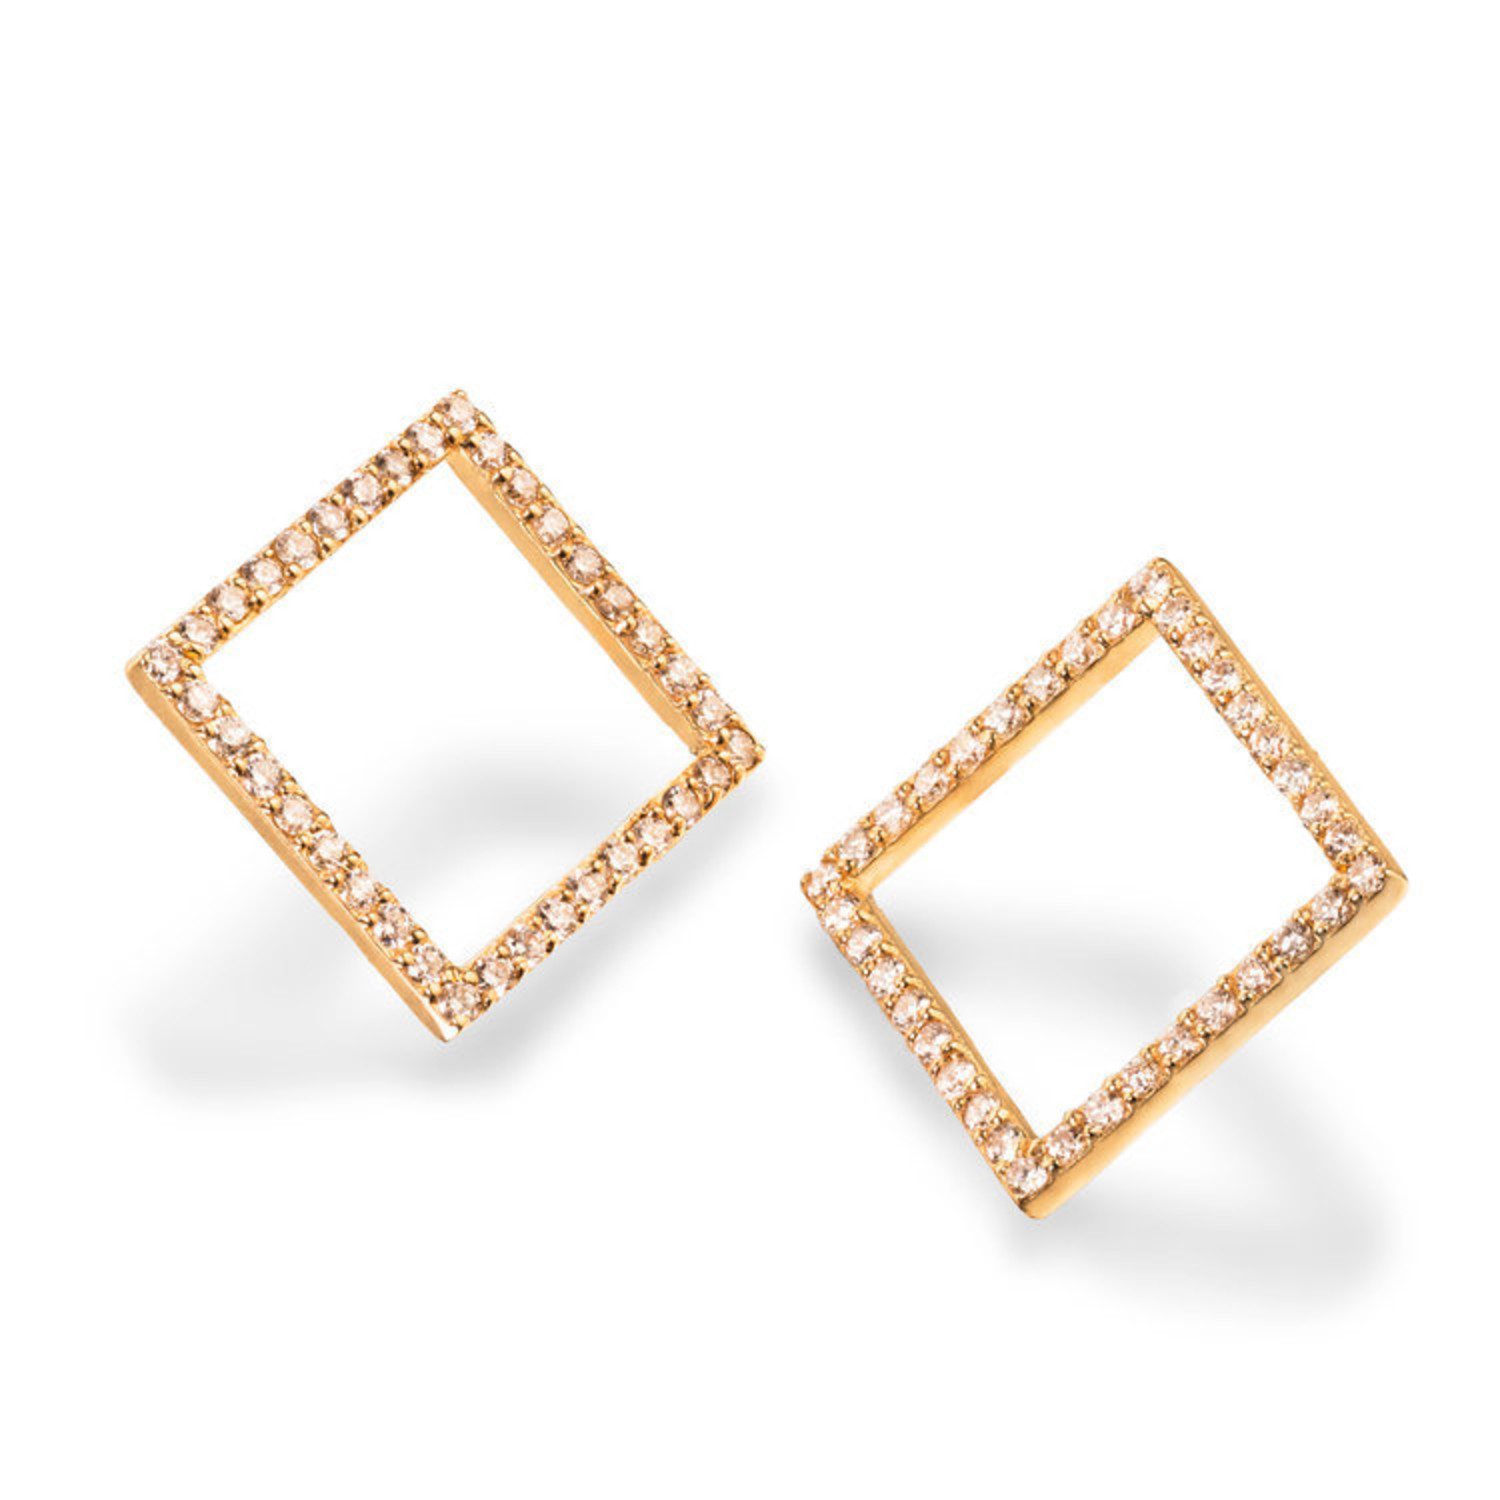 Buy Gold-Toned & White Earrings for Women by Sohi Online | Ajio.com